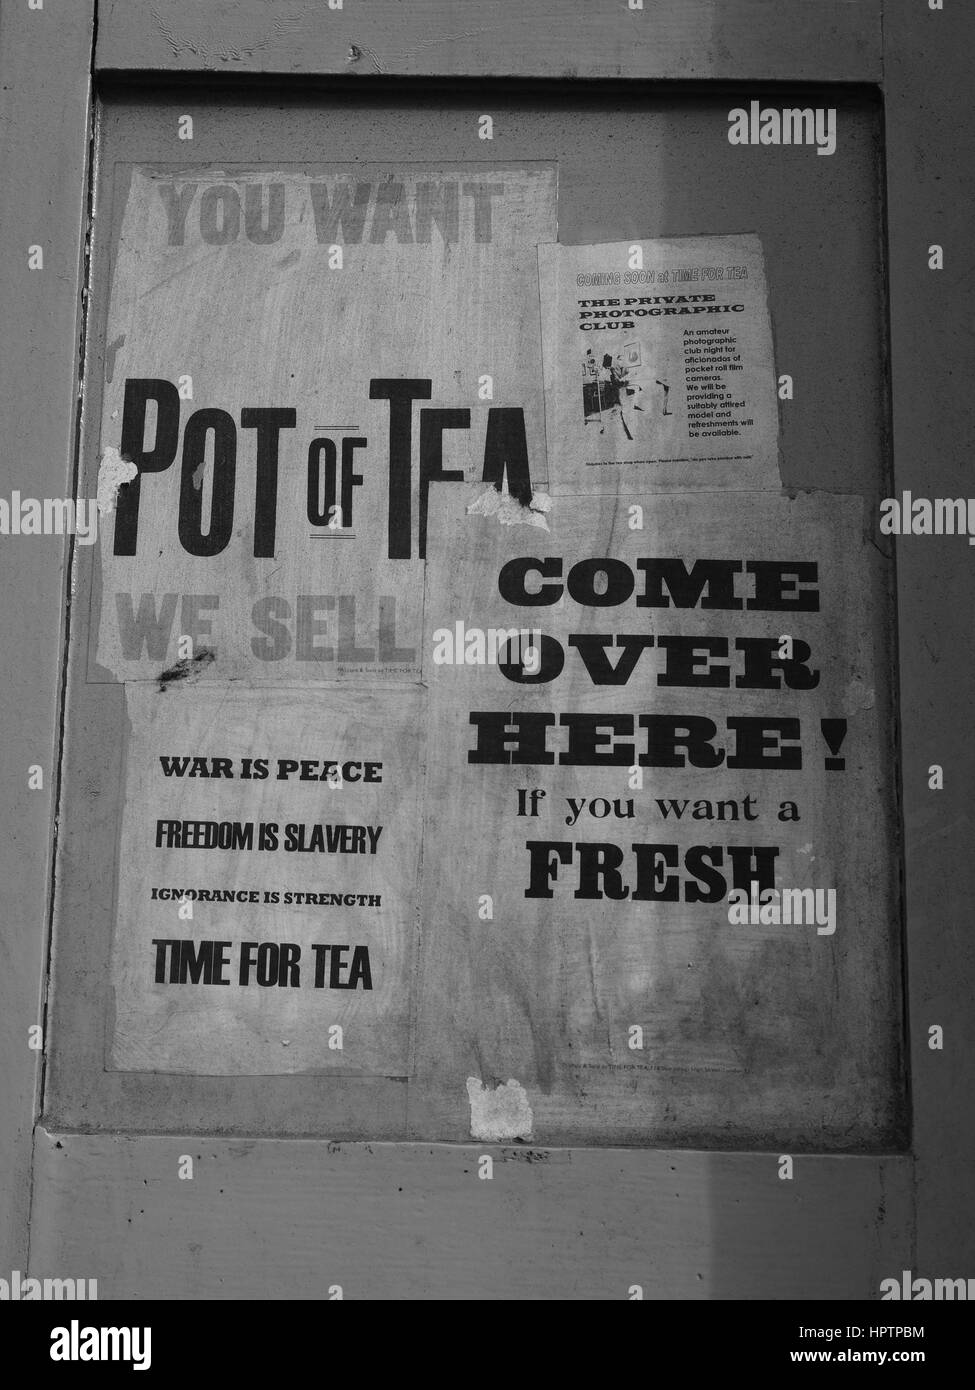 Pot of/Time for Tea sign Stock Photo